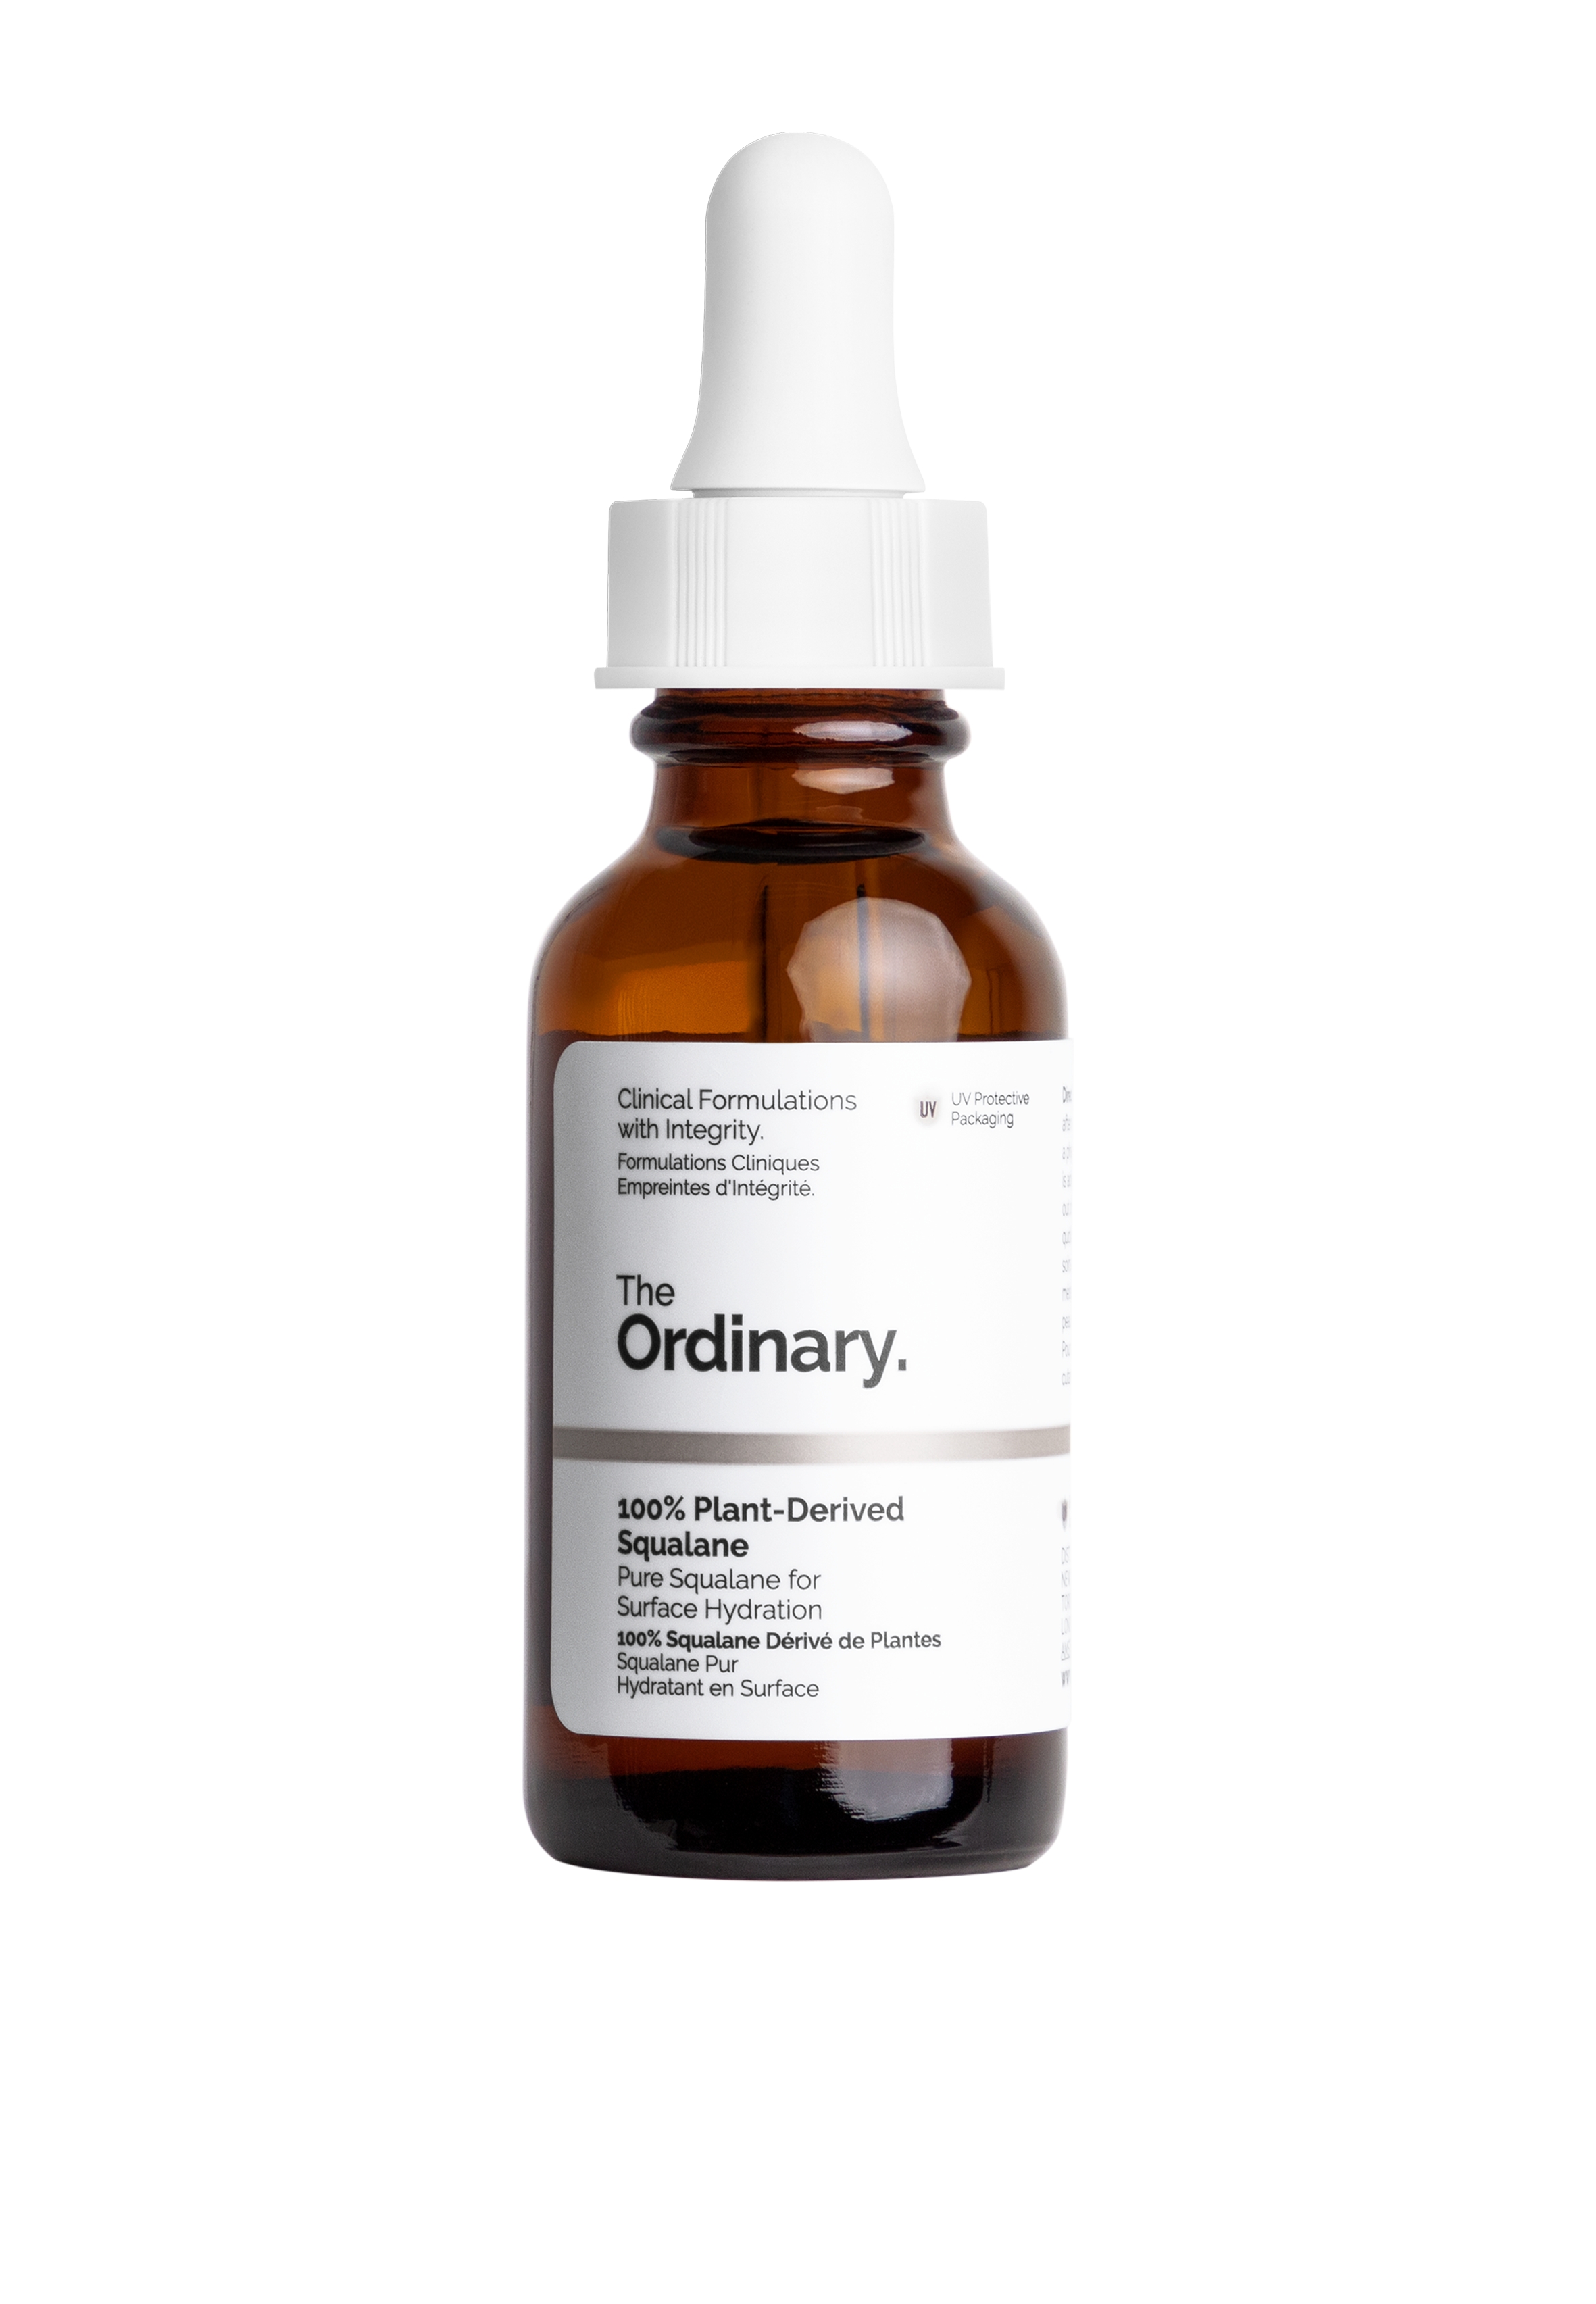 The Ordinary 100% Plant-Derived Squalane Hydrating Solution